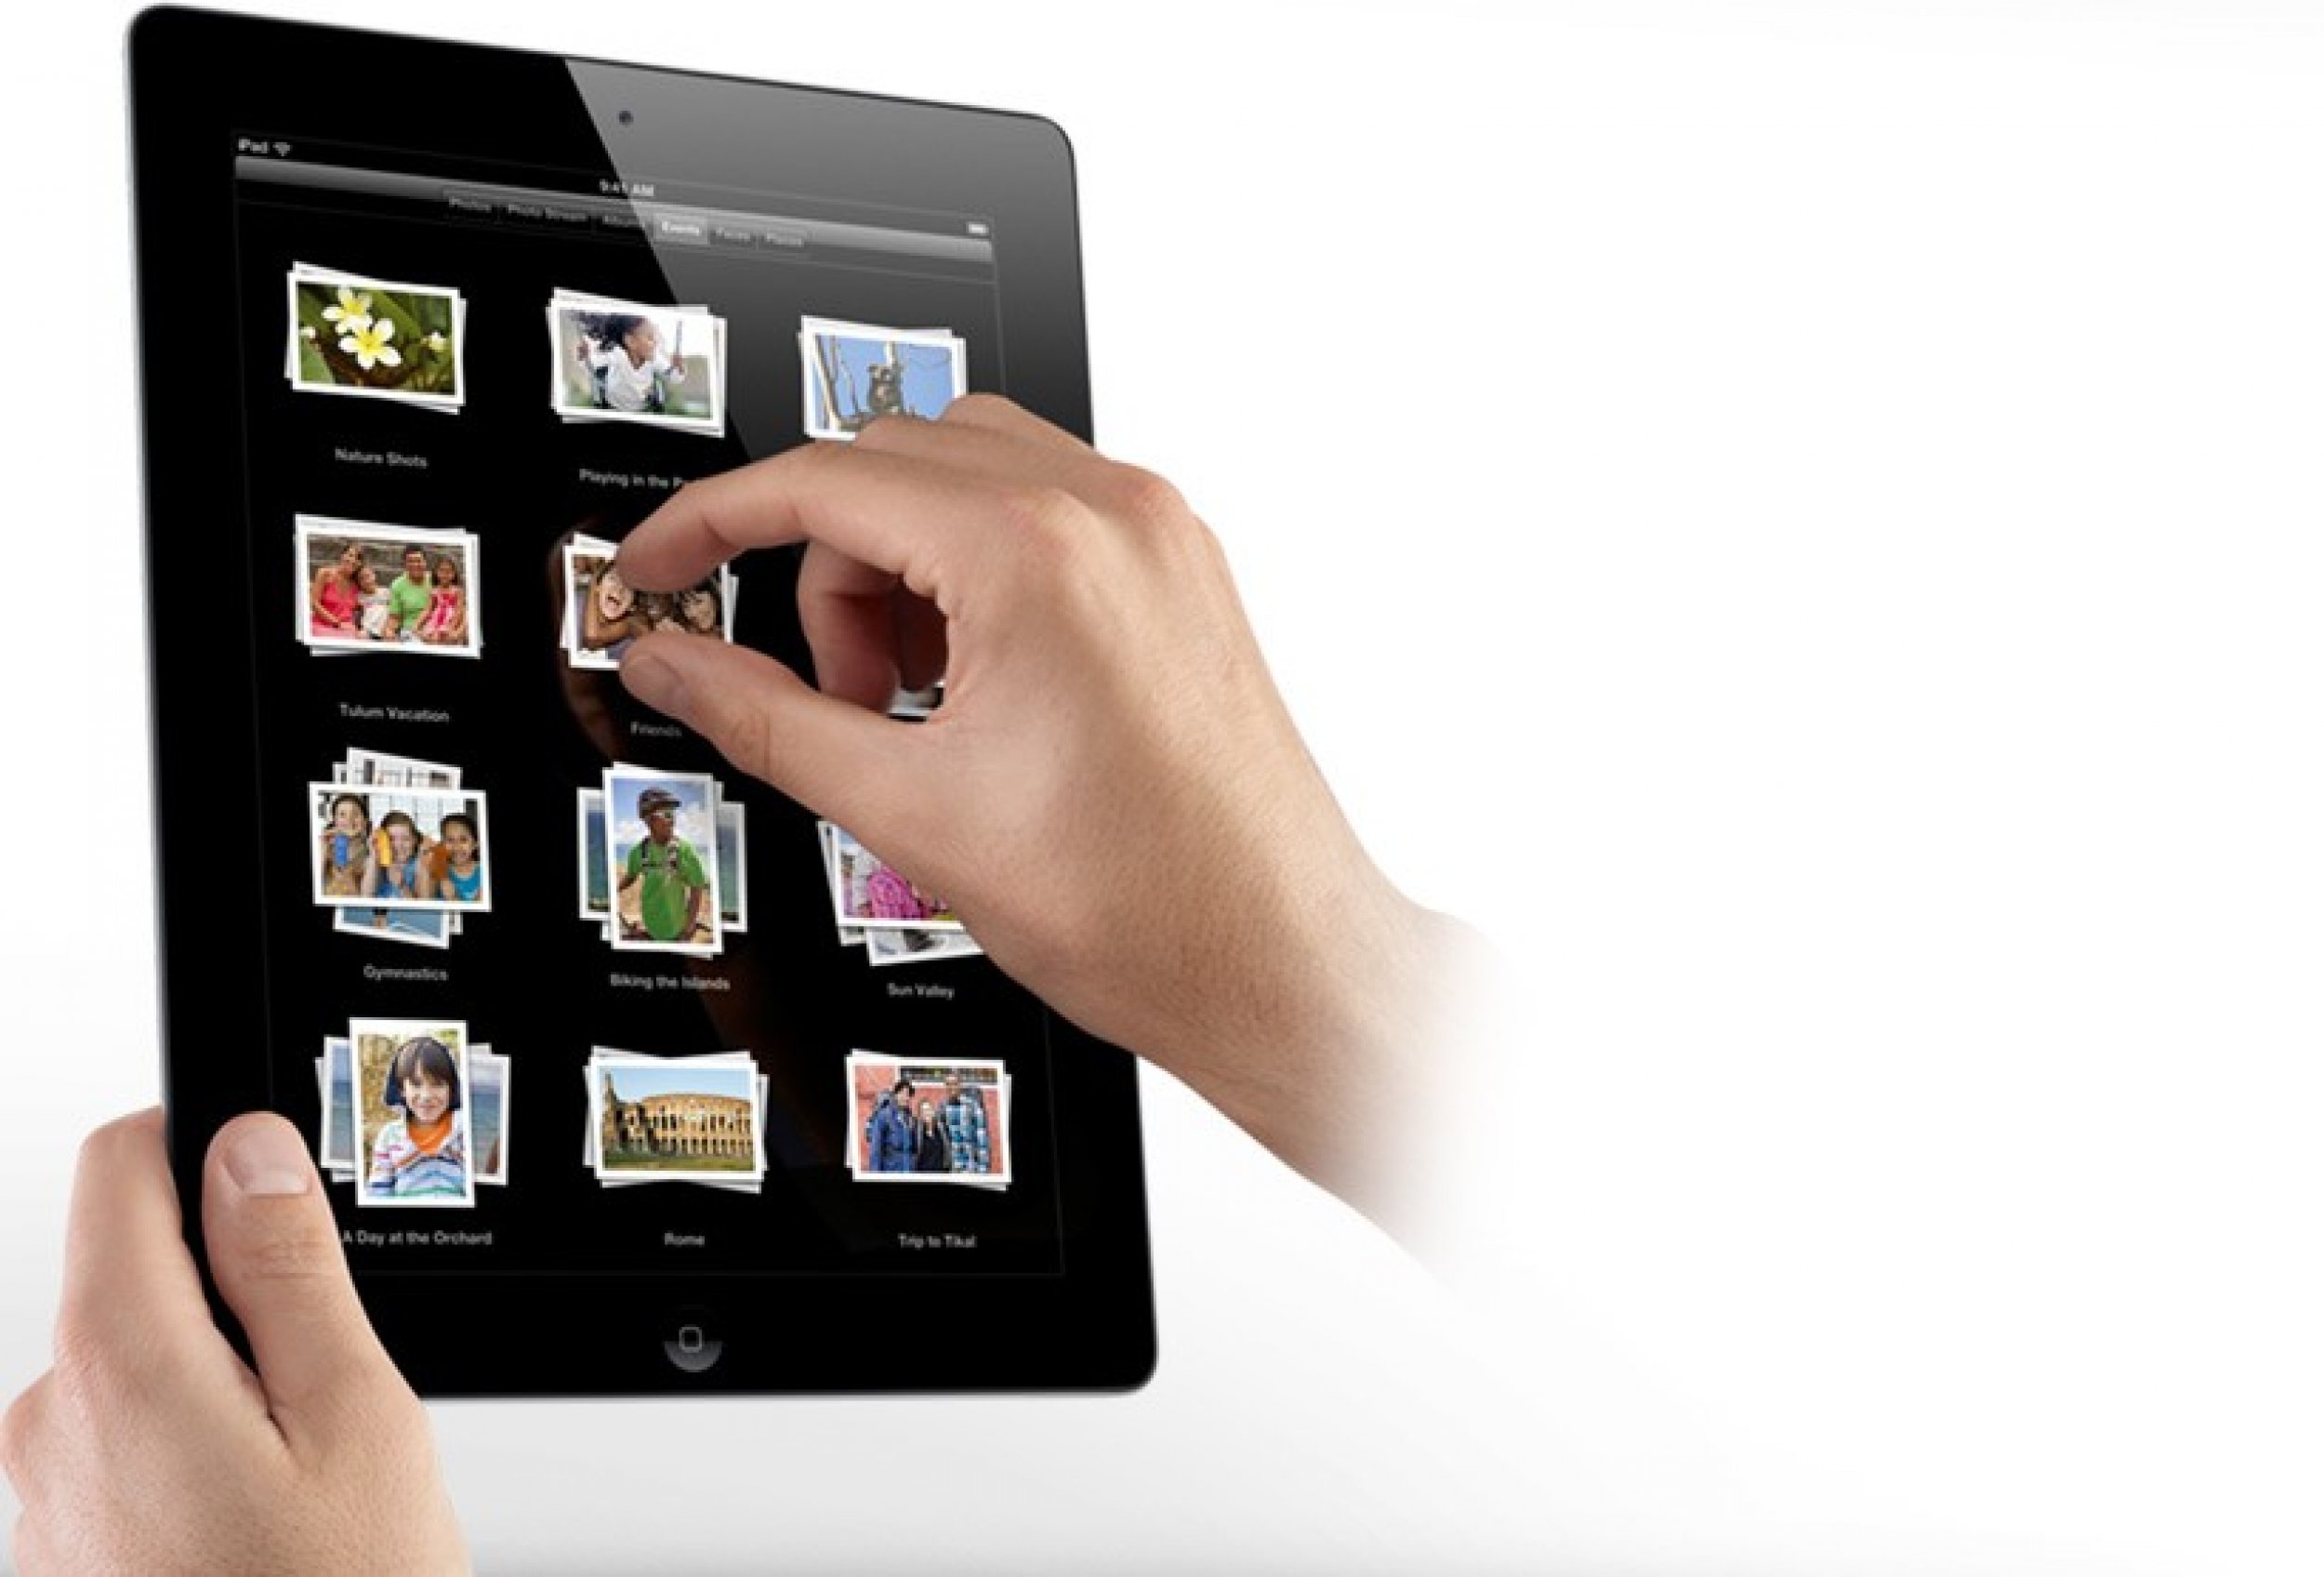 iPad 3 Release Rumor Apple to Unveil 16GB, 32GB Models, Plus an 8GB iPad 2 on March 7